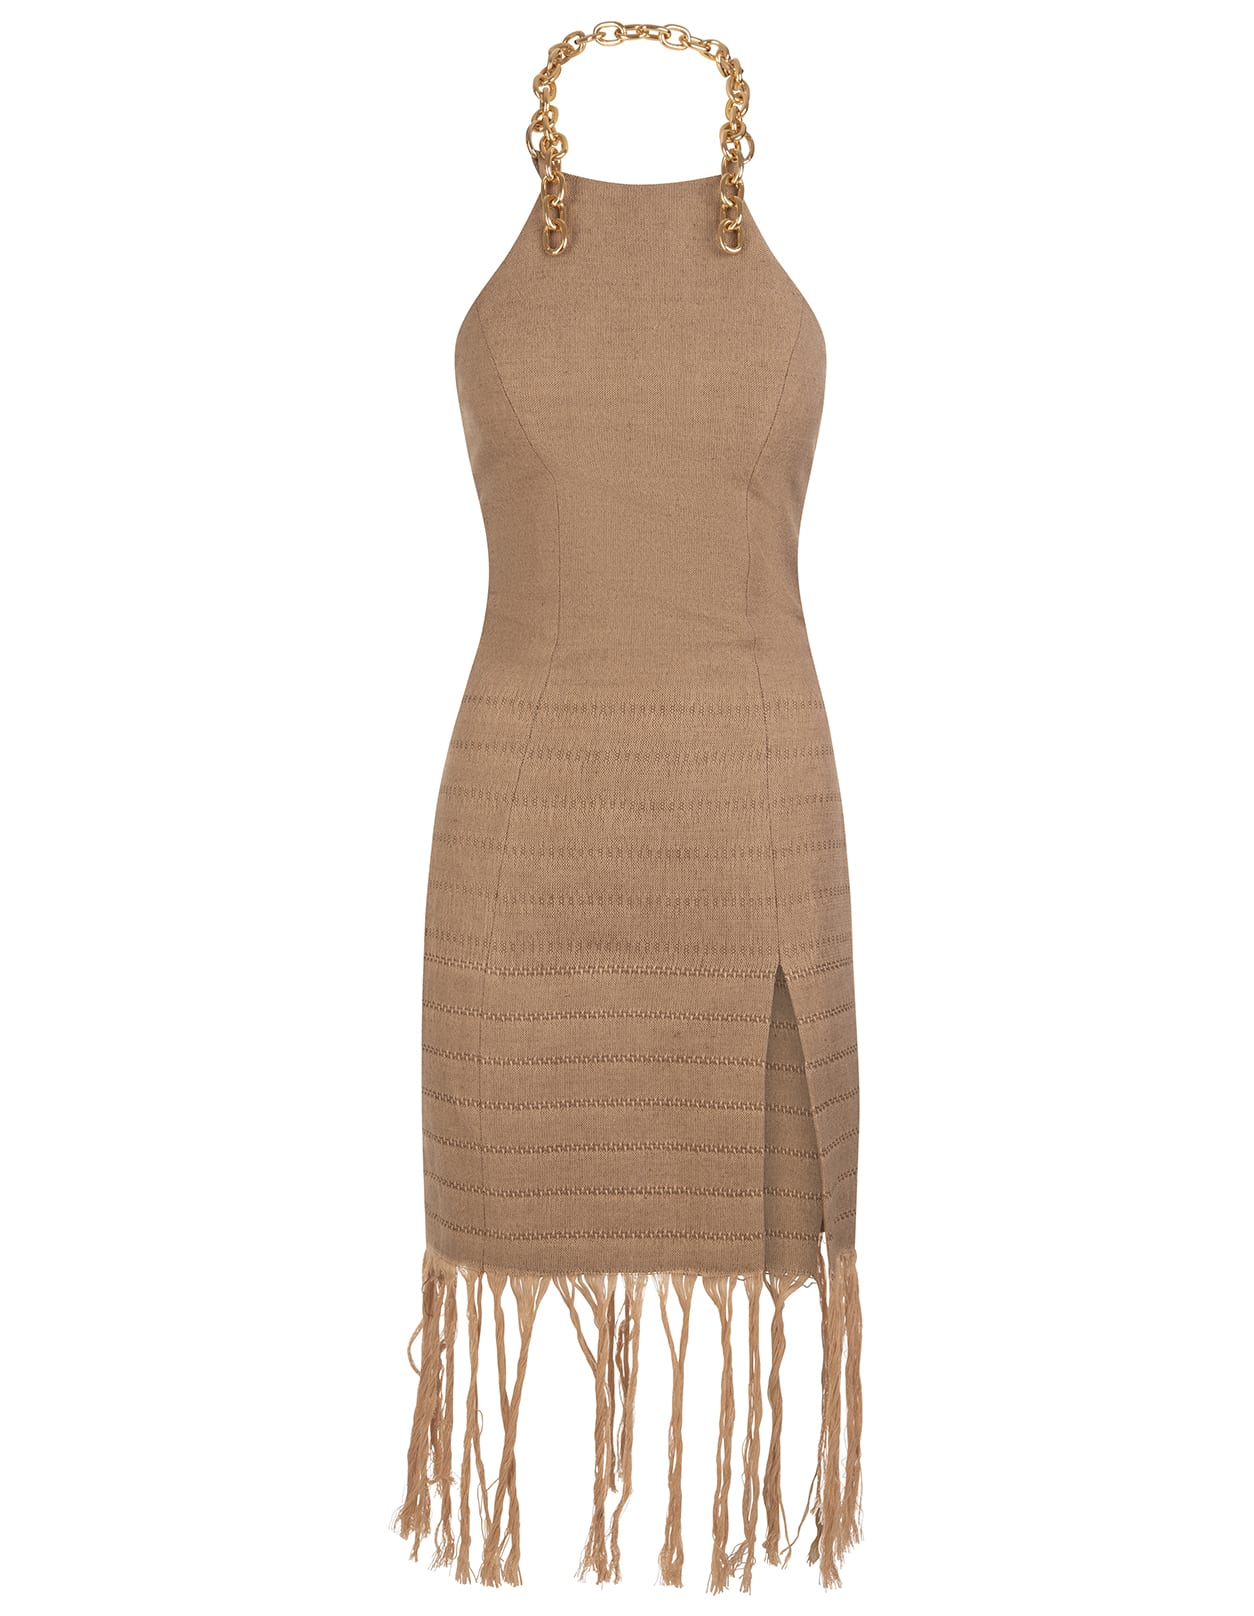 Giuseppe di Morabito Short Dress In Camel Linen Blend With Fringes And Chain